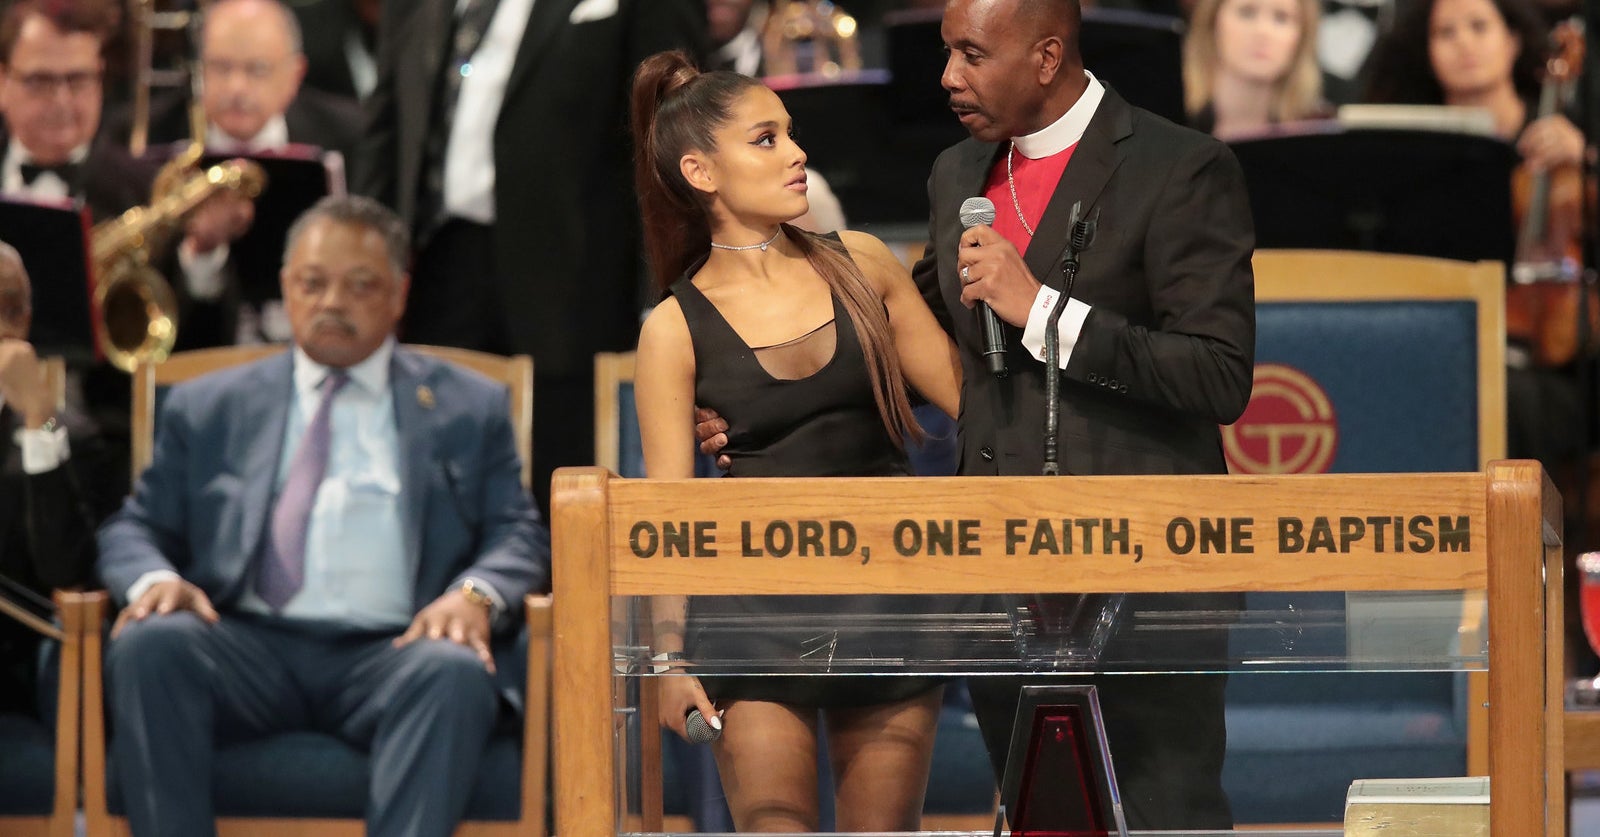 Ariana Grande Is Treating A Bishop Touching Her Breast As An Accident,  Police Said